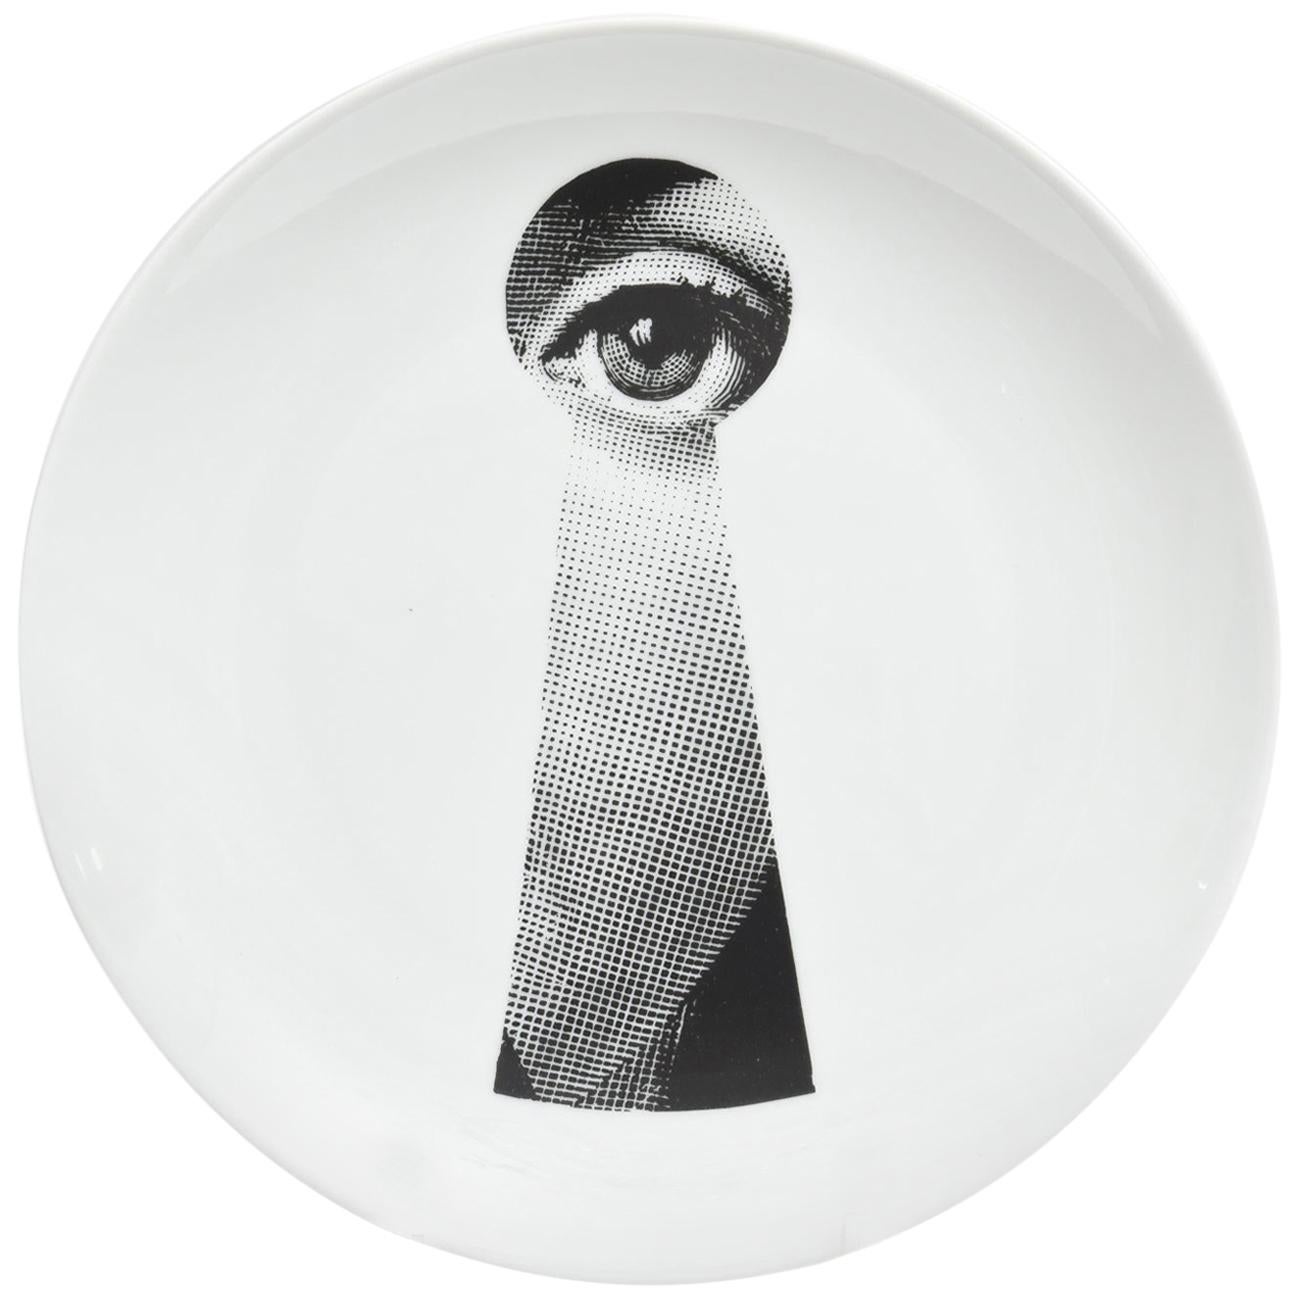 Assiette d'exposition vintage Piero Fornasetti, collection Barney's New York